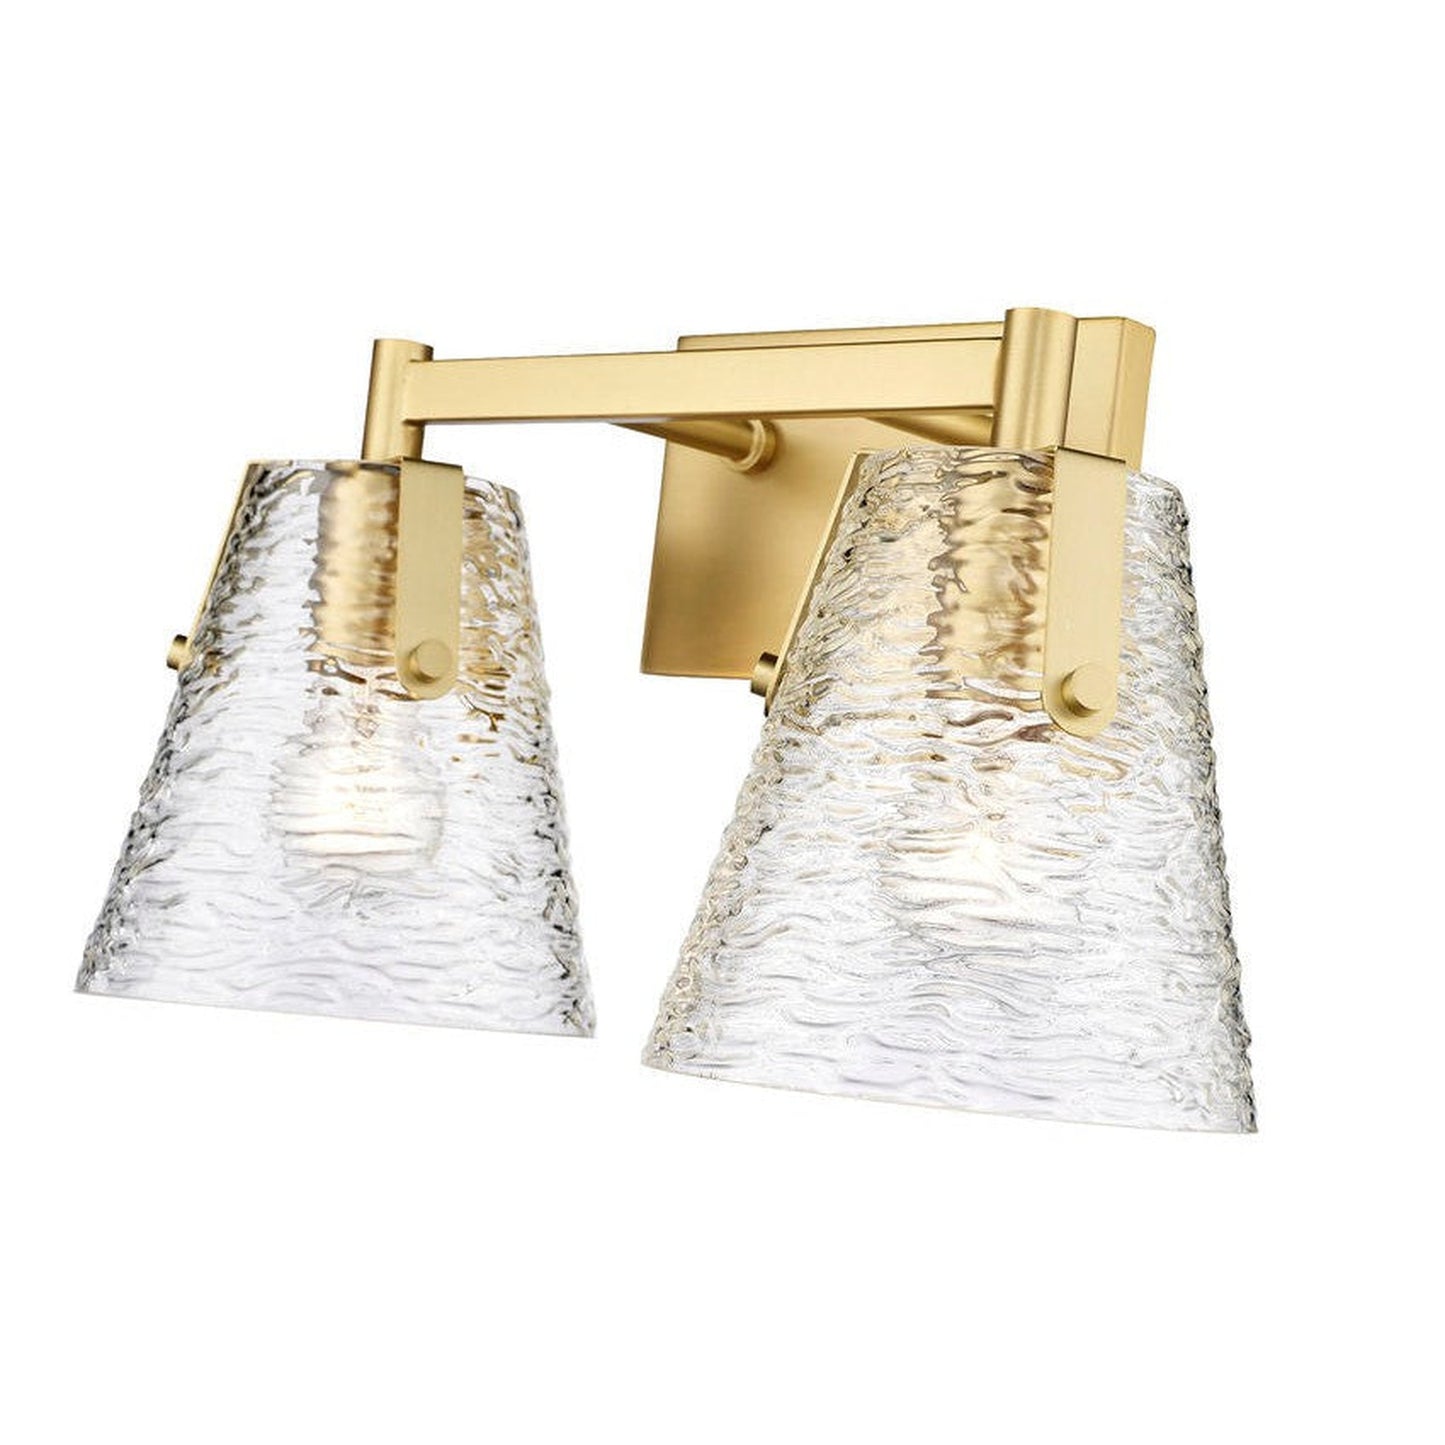 Z-Lite Analia 17" 2-Light Modern Gold and Clear Ribbed Glass Shade Vanity Light